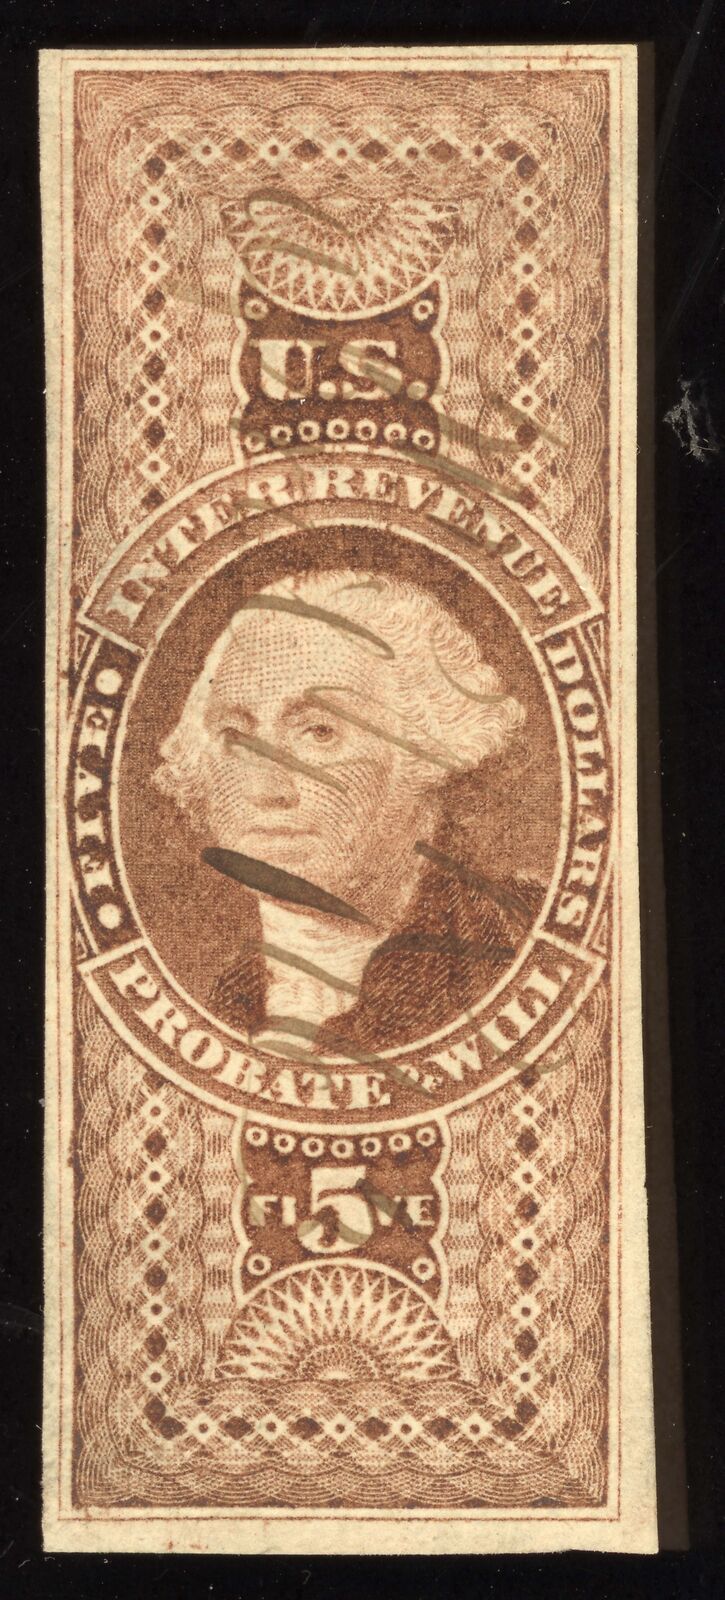 US Scott R92a Used $5 red Probate of Will Revenue Lot AR050 bhmstamps